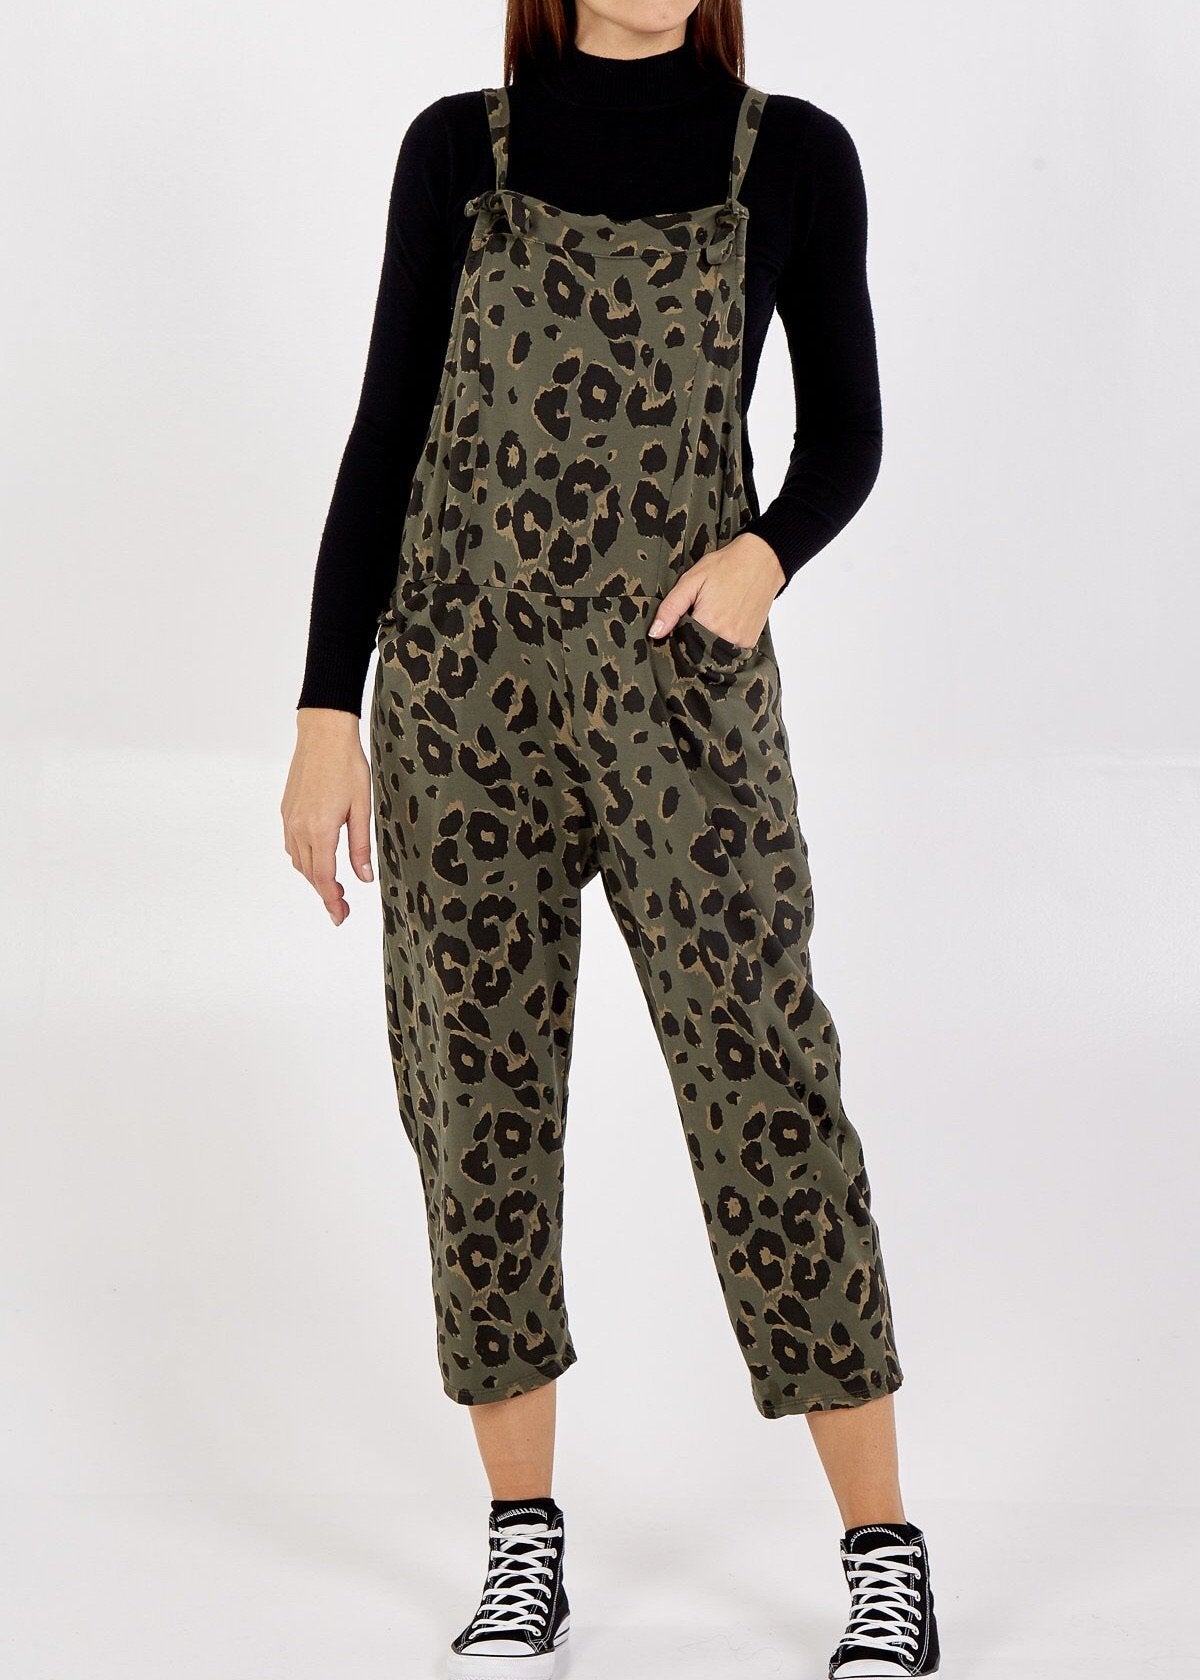 Porthleven Dungarees with pockets in khaki with leopard print pattern and tie up straps